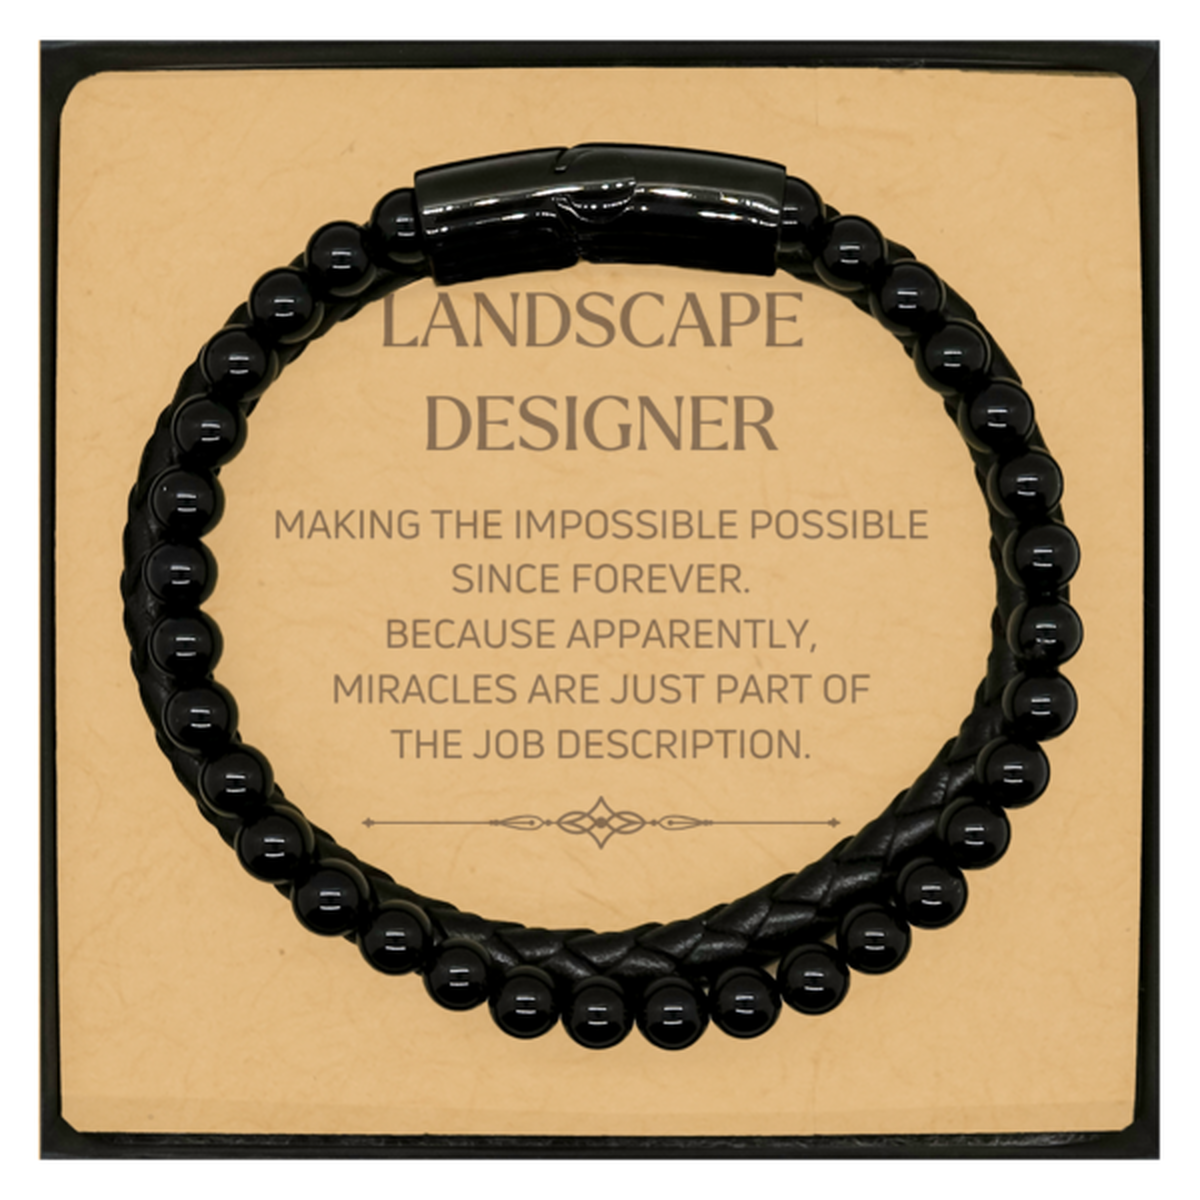 Funny Landscape Designer Gifts, Miracles are just part of the job description, Inspirational Birthday Christmas Stone Leather Bracelets For Landscape Designer, Men, Women, Coworkers, Friends, Boss